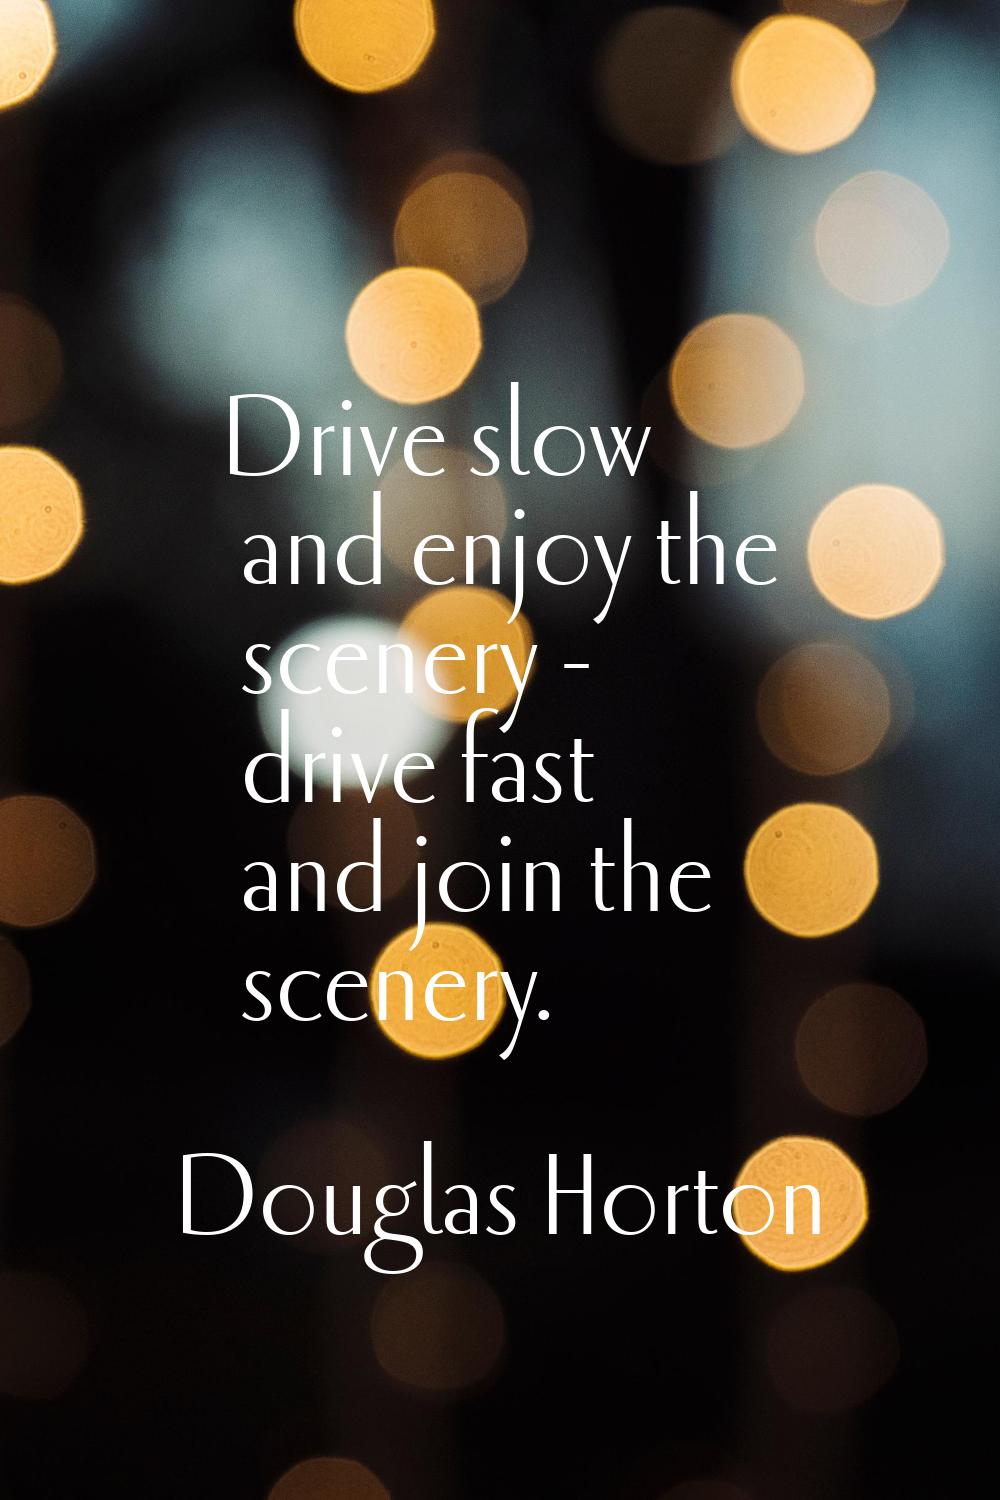 Drive slow and enjoy the scenery - drive fast and join the scenery.